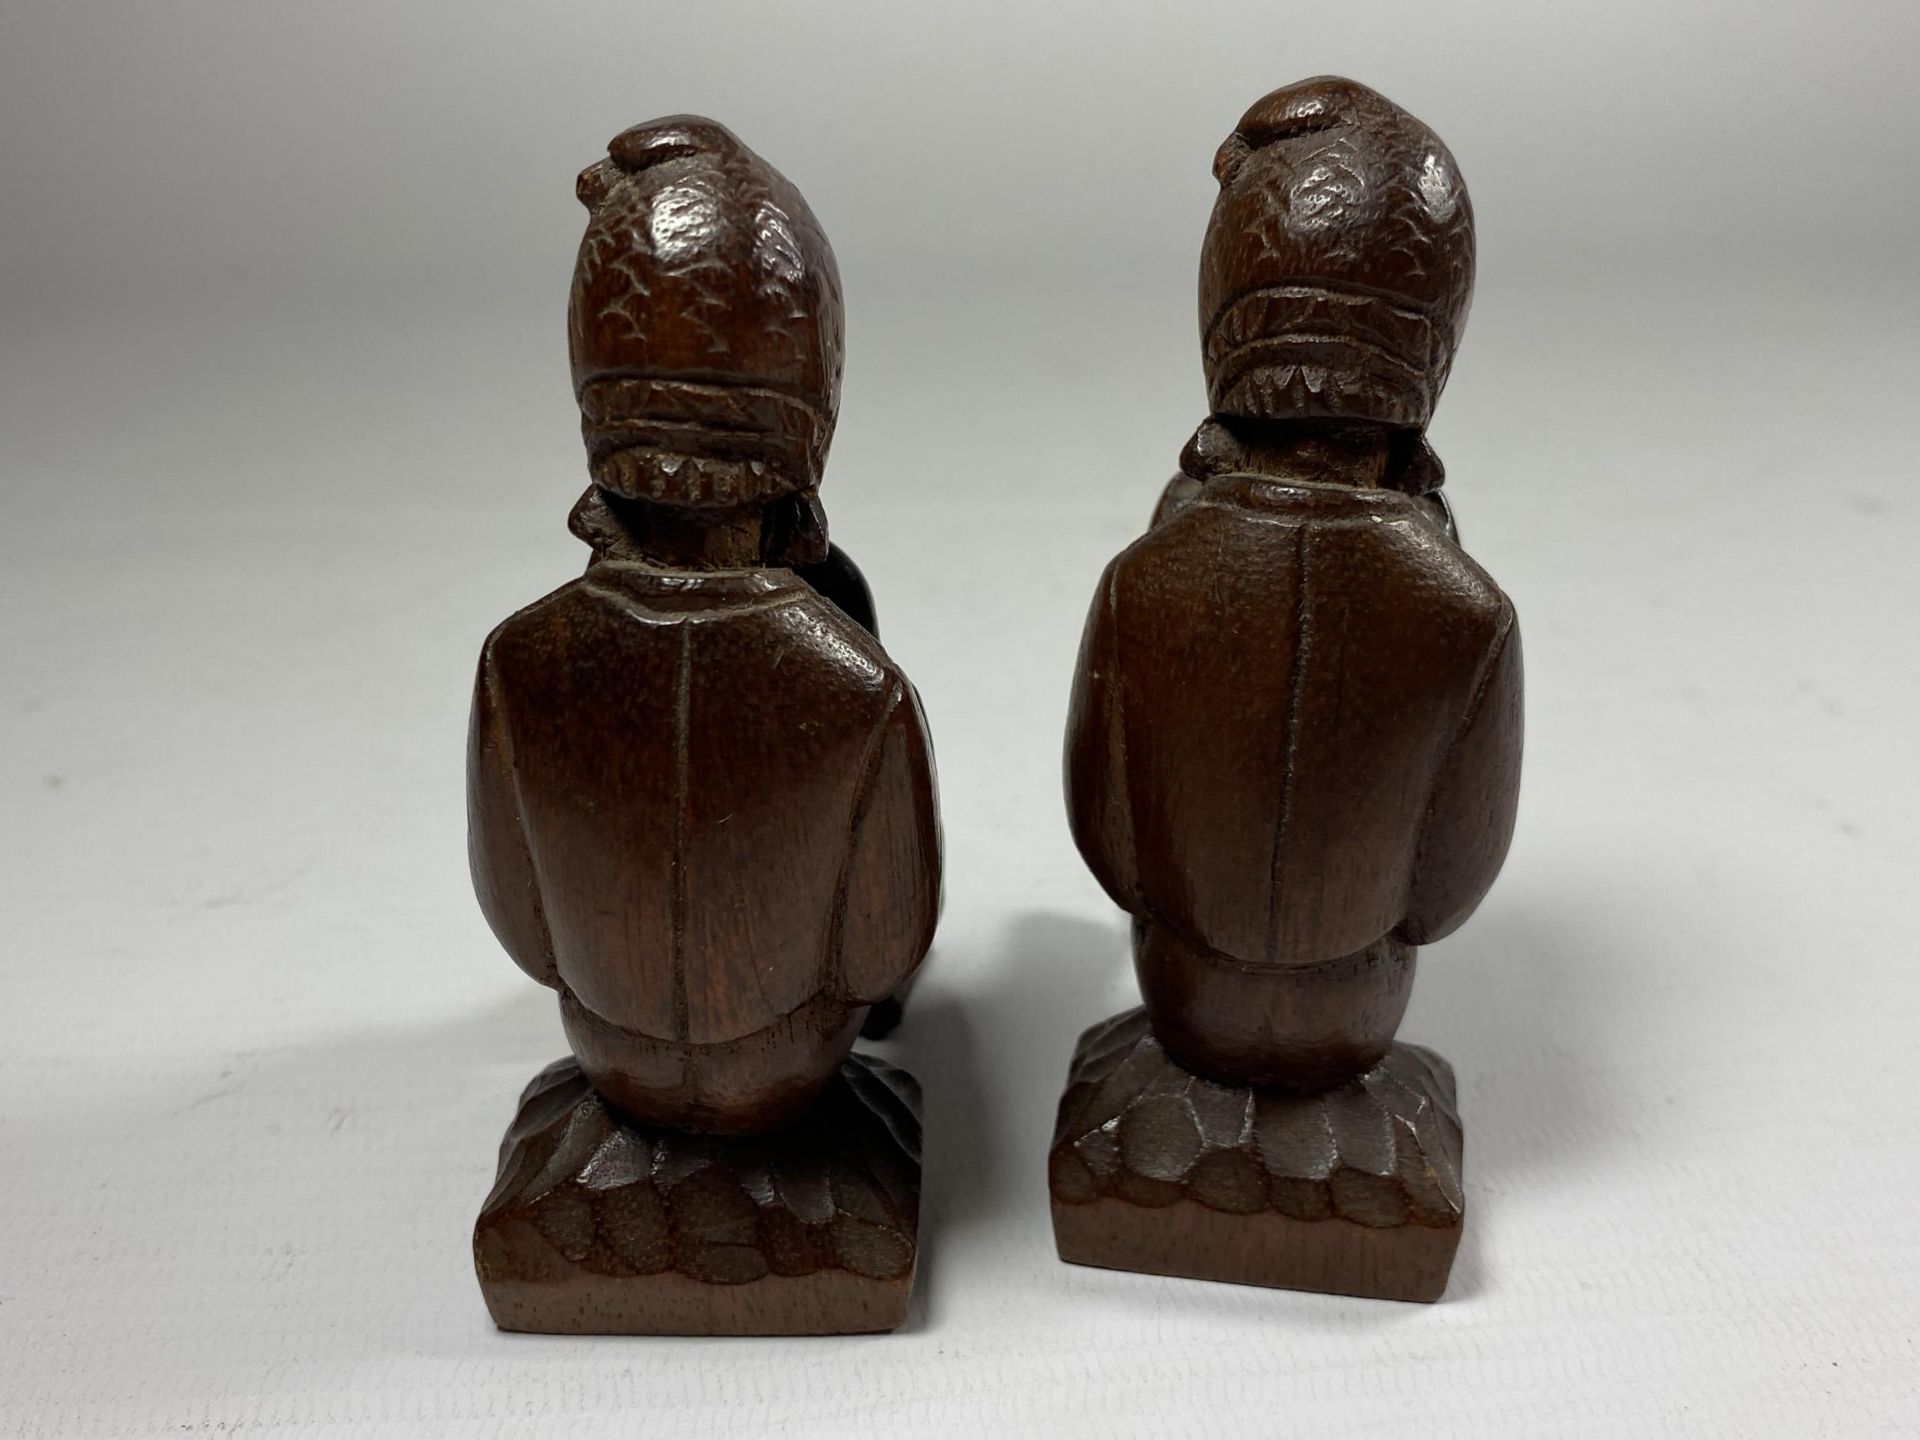 A PAIR OF MINIATURE TRIBAL CARVED WOODEN FIGURES, HEIGHT 9CM - Image 2 of 4